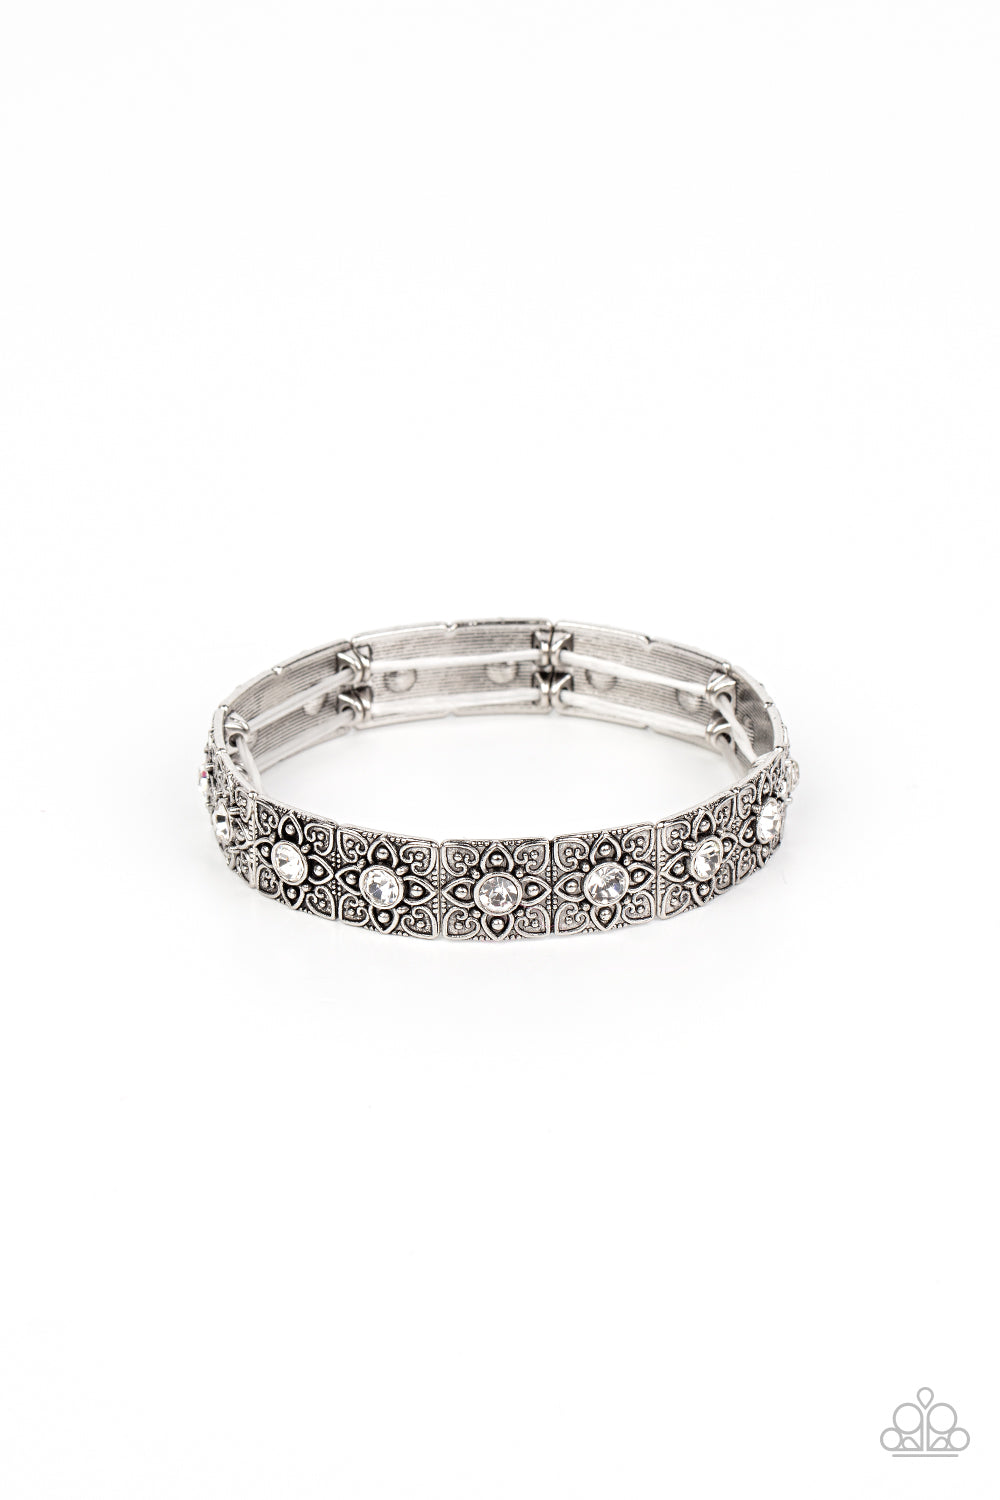 Venetian Valentine Silver Bracelet - Paparazzi Accessories - Dotted with dainty white rhinestone centers, floral filigree embossed silver frames are threaded along stretchy bands around the wrist for a romantic pop of color. Sold as one individual bracelet.